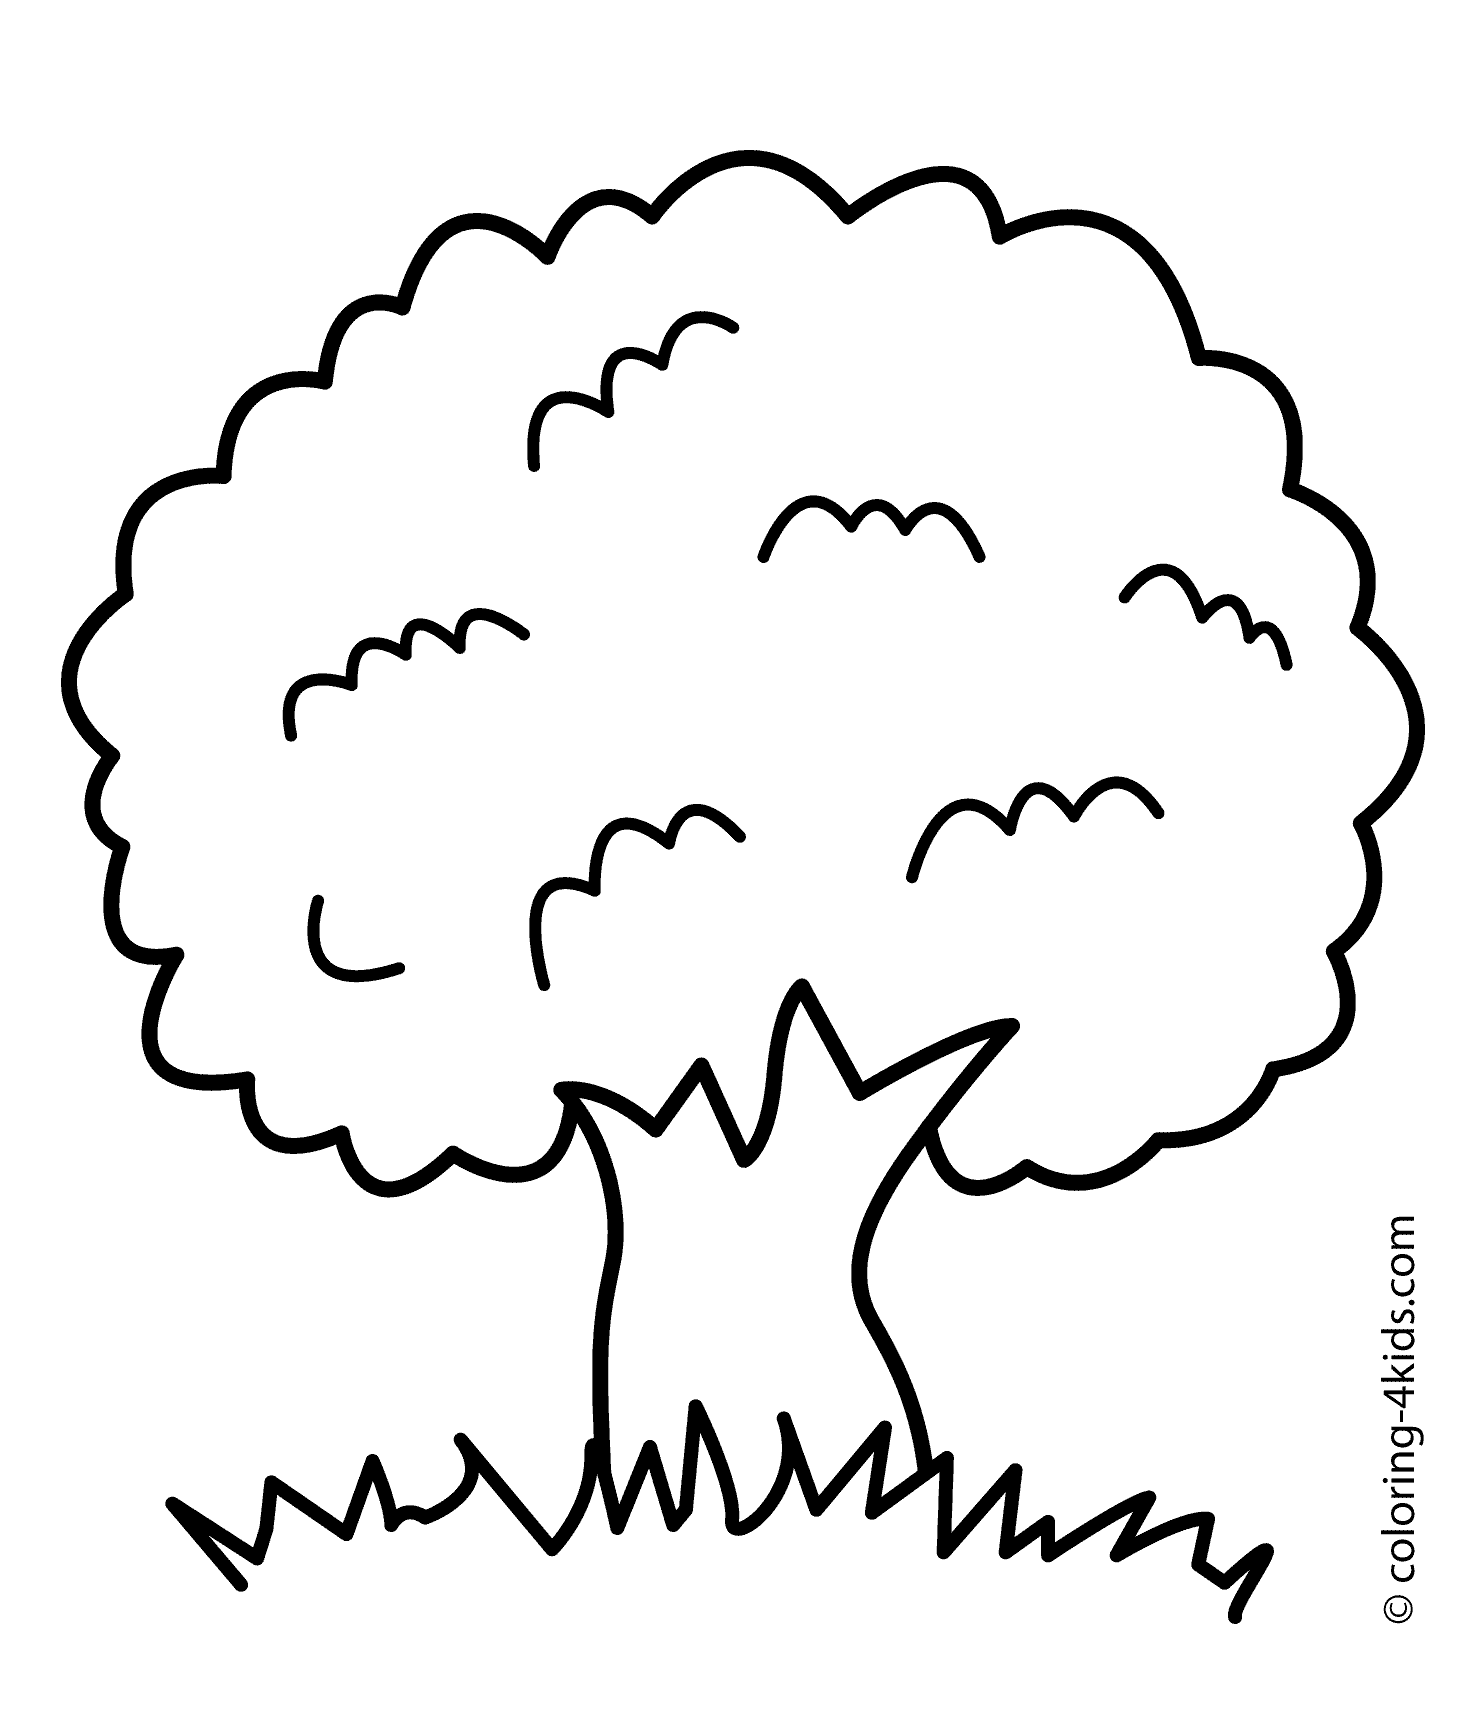 Coloring Page Children With Tree - Coloring Home